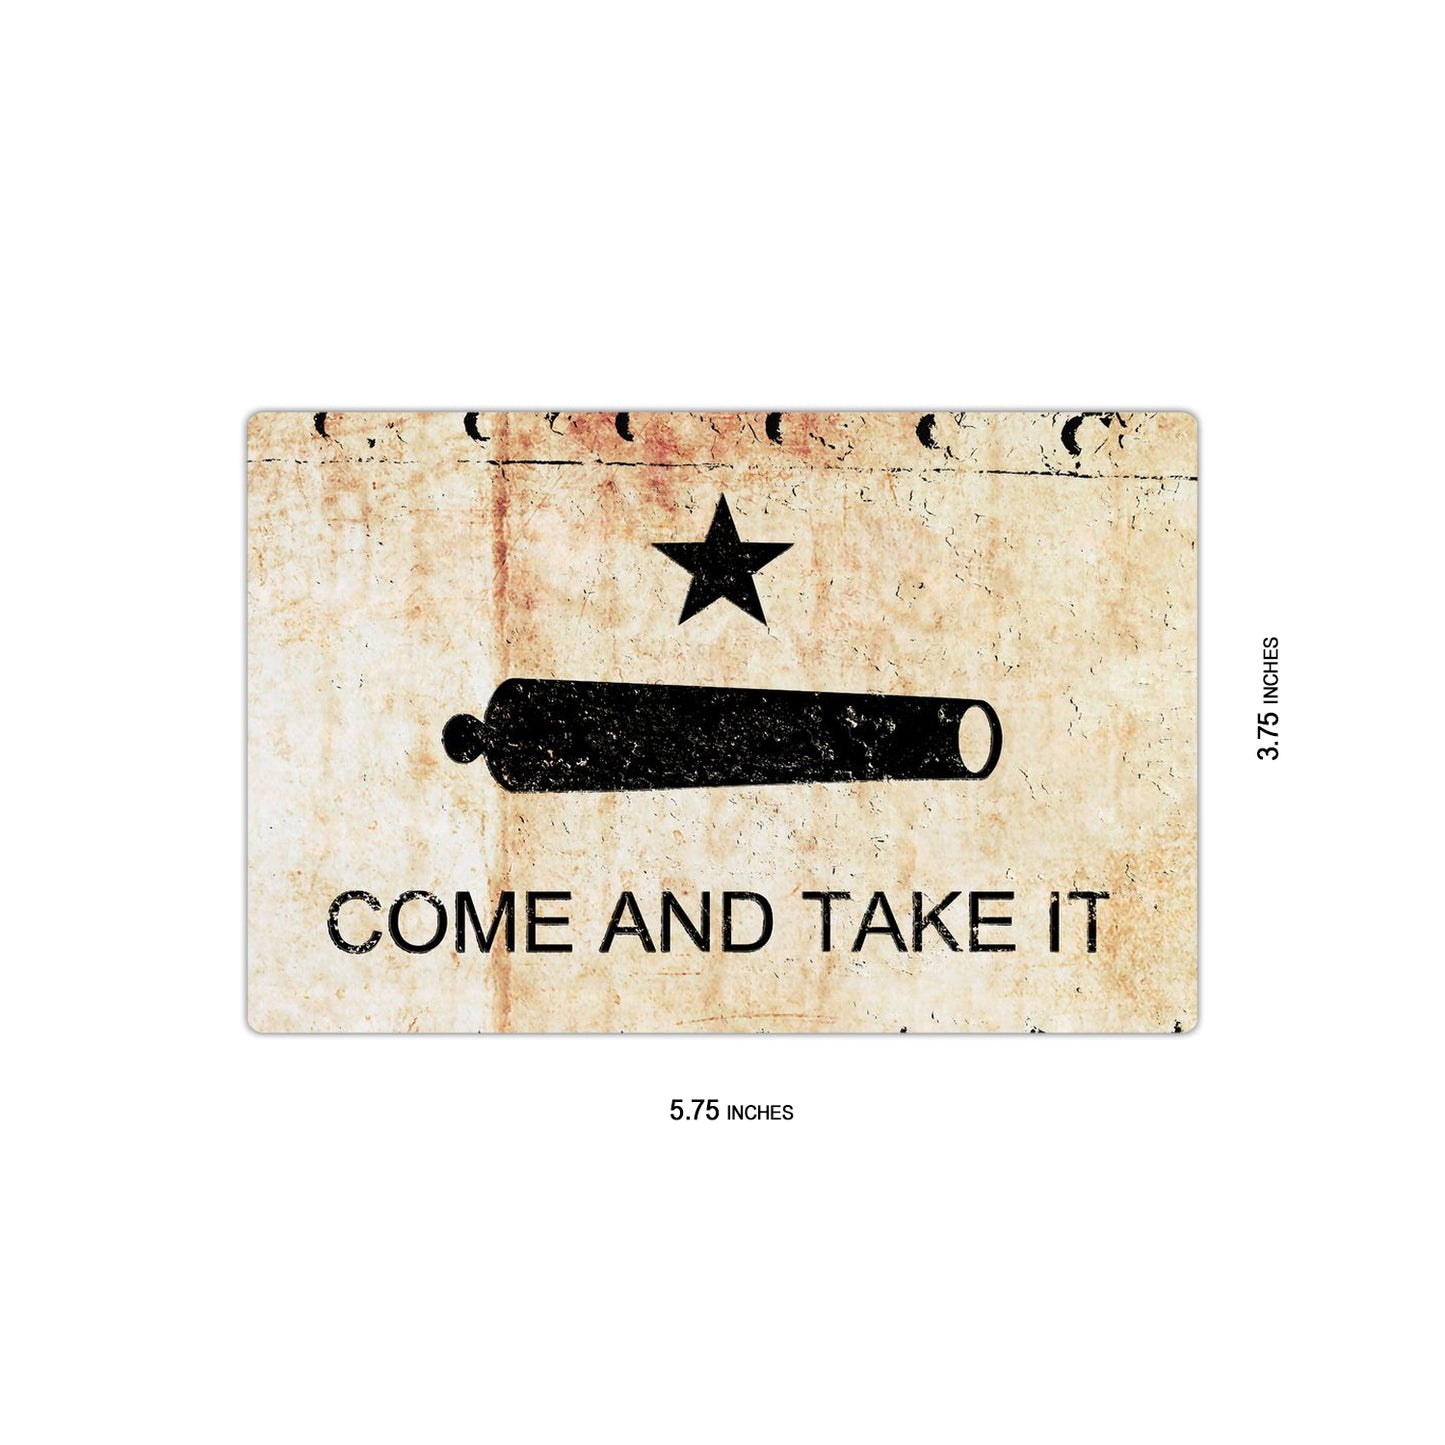 Come and Take it Fridge Magnet - Gonzales Battle Flag on Rusted Riveted Plate Print on 4x6 magnet dimensions